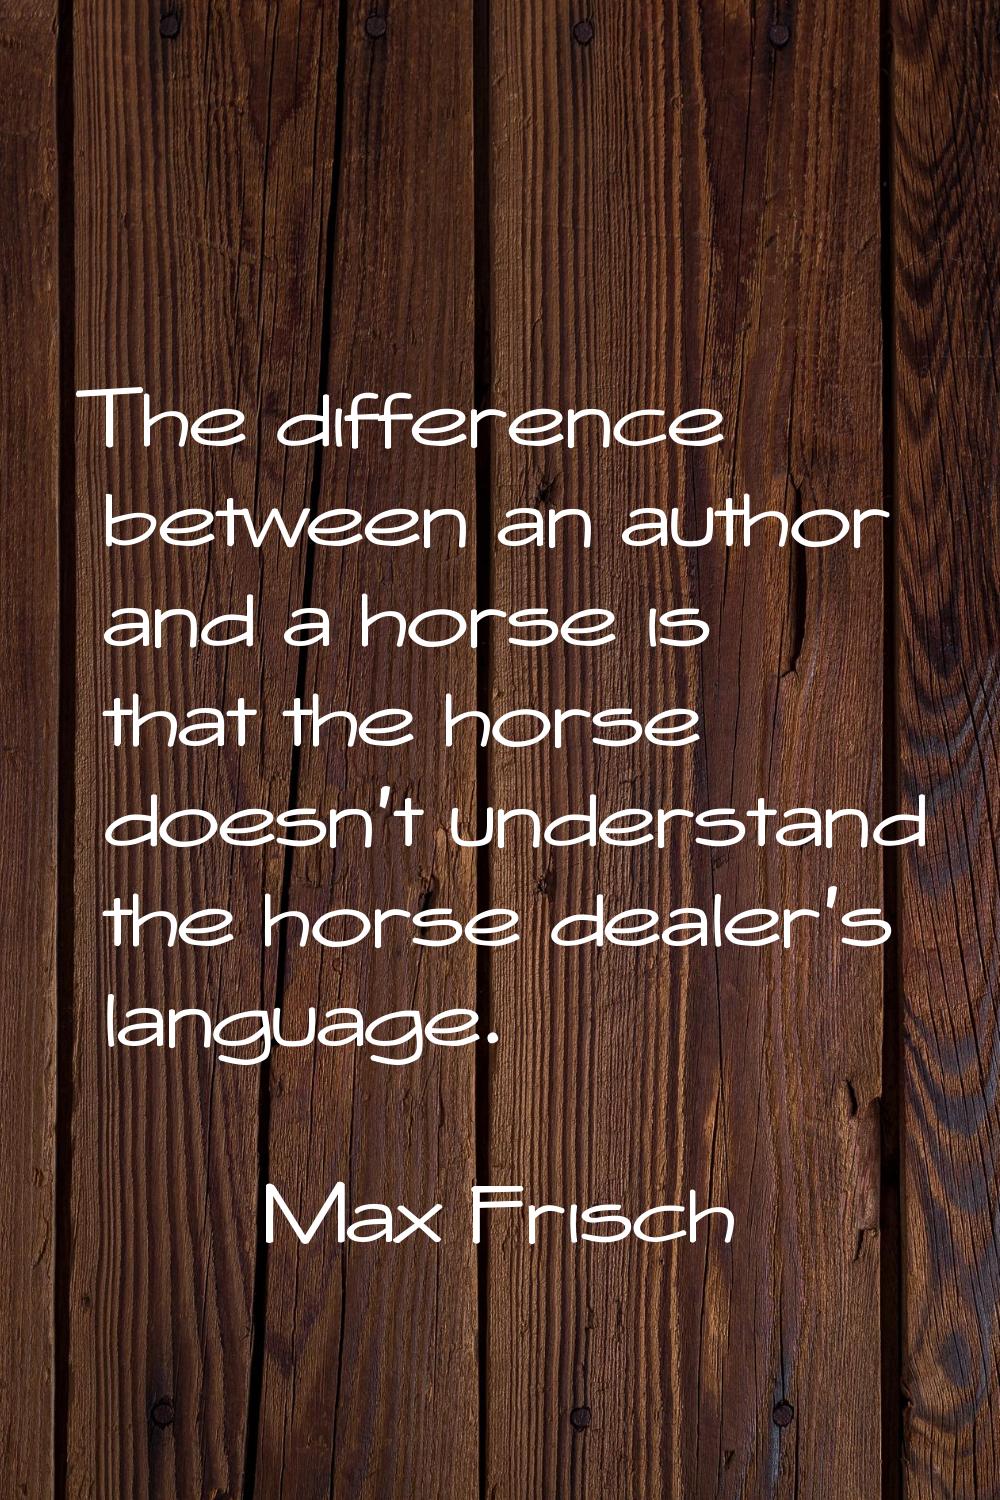 The difference between an author and a horse is that the horse doesn't understand the horse dealer'